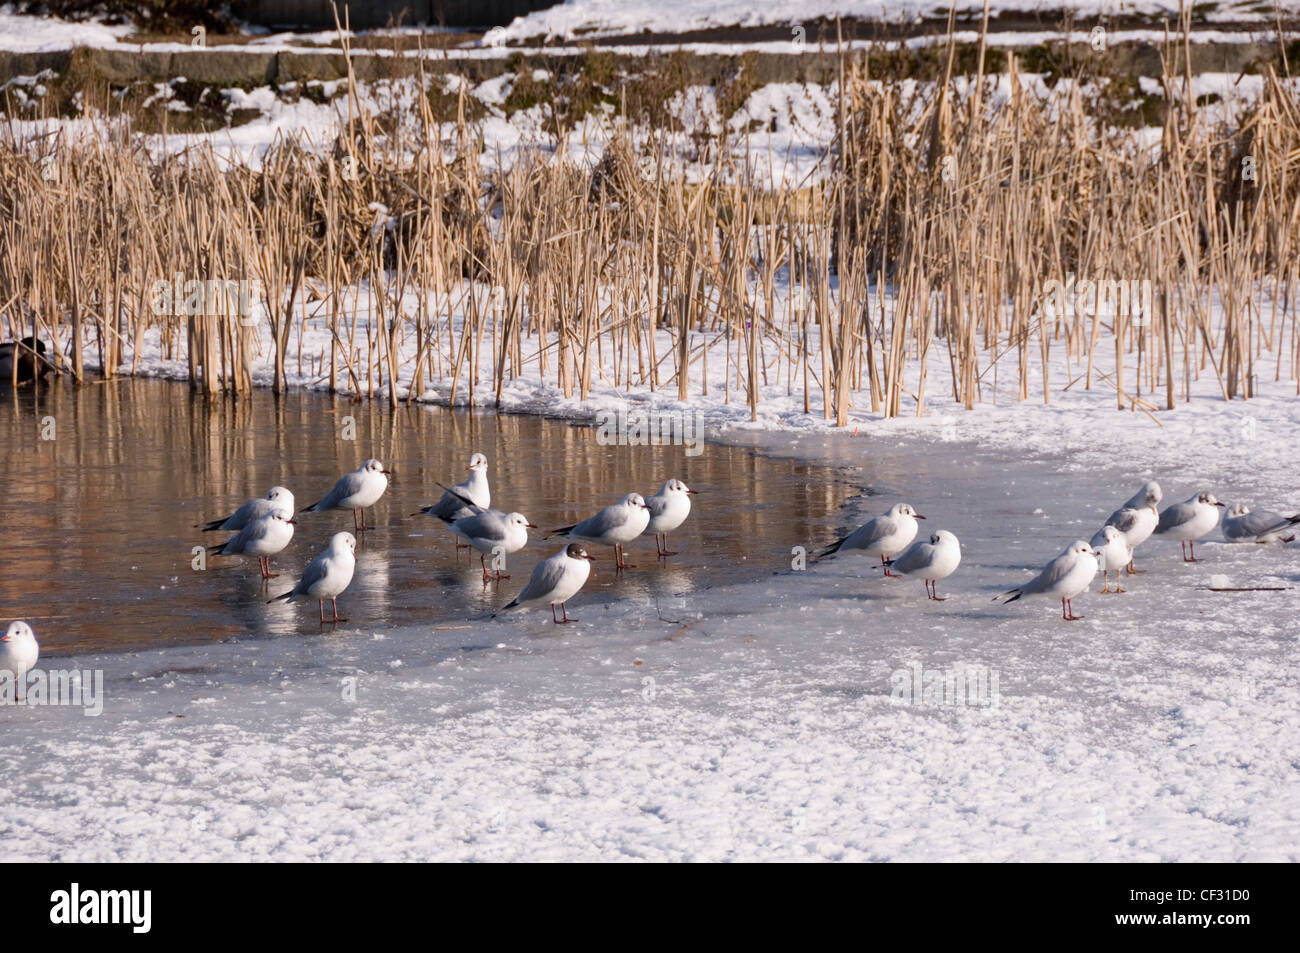 Tylers Green - winter scene - part frozen and snow covered pond - seagulls resting in winter sunlight - backdrop of tall reeds Stock Photo